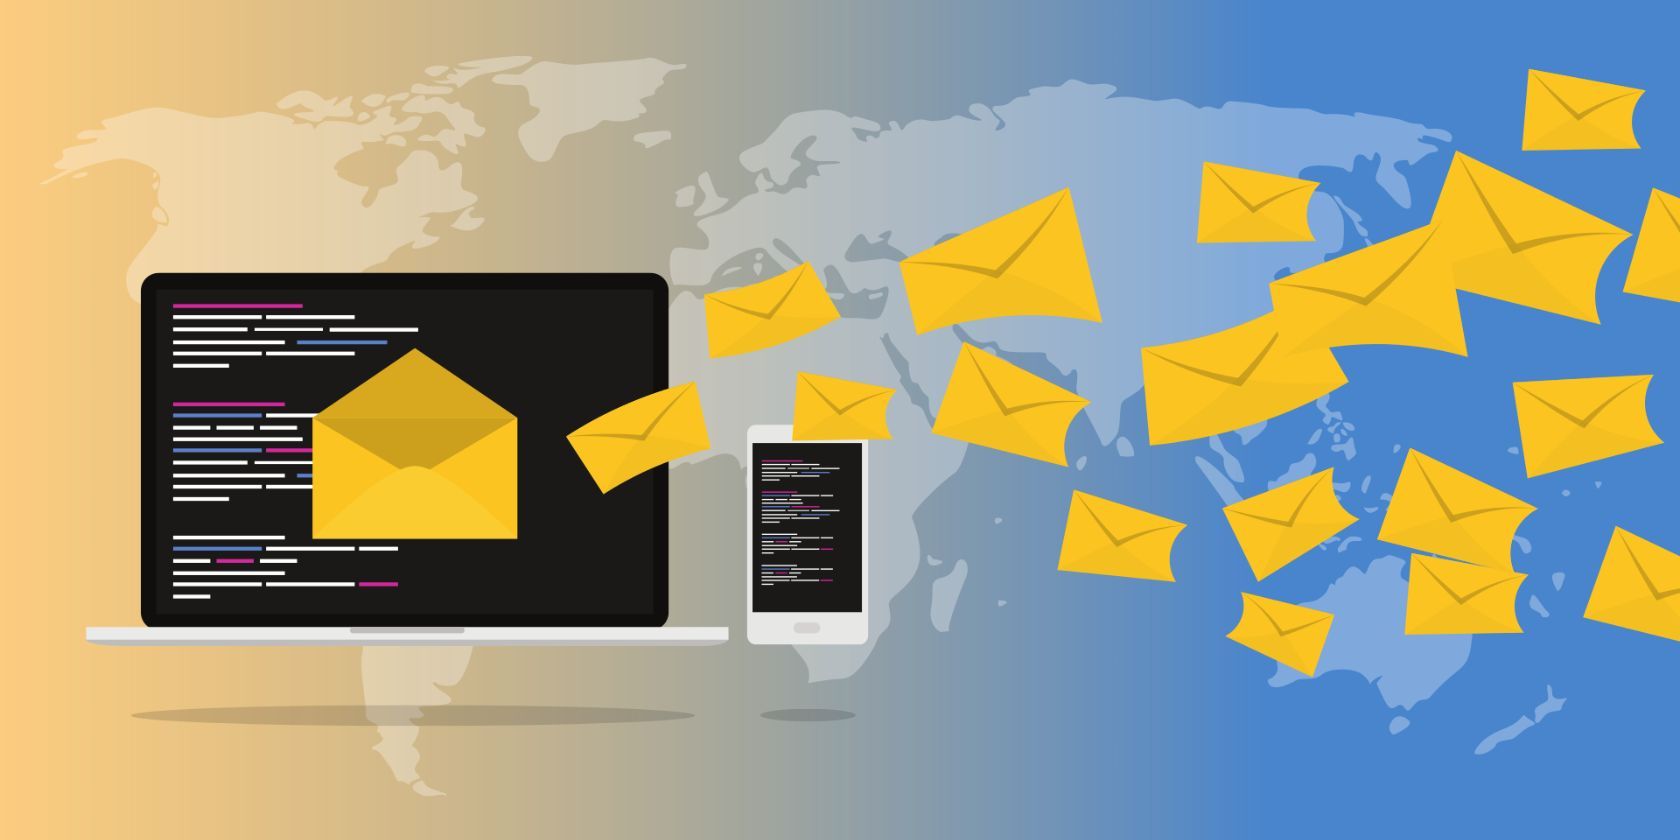 An illustration of email marketing